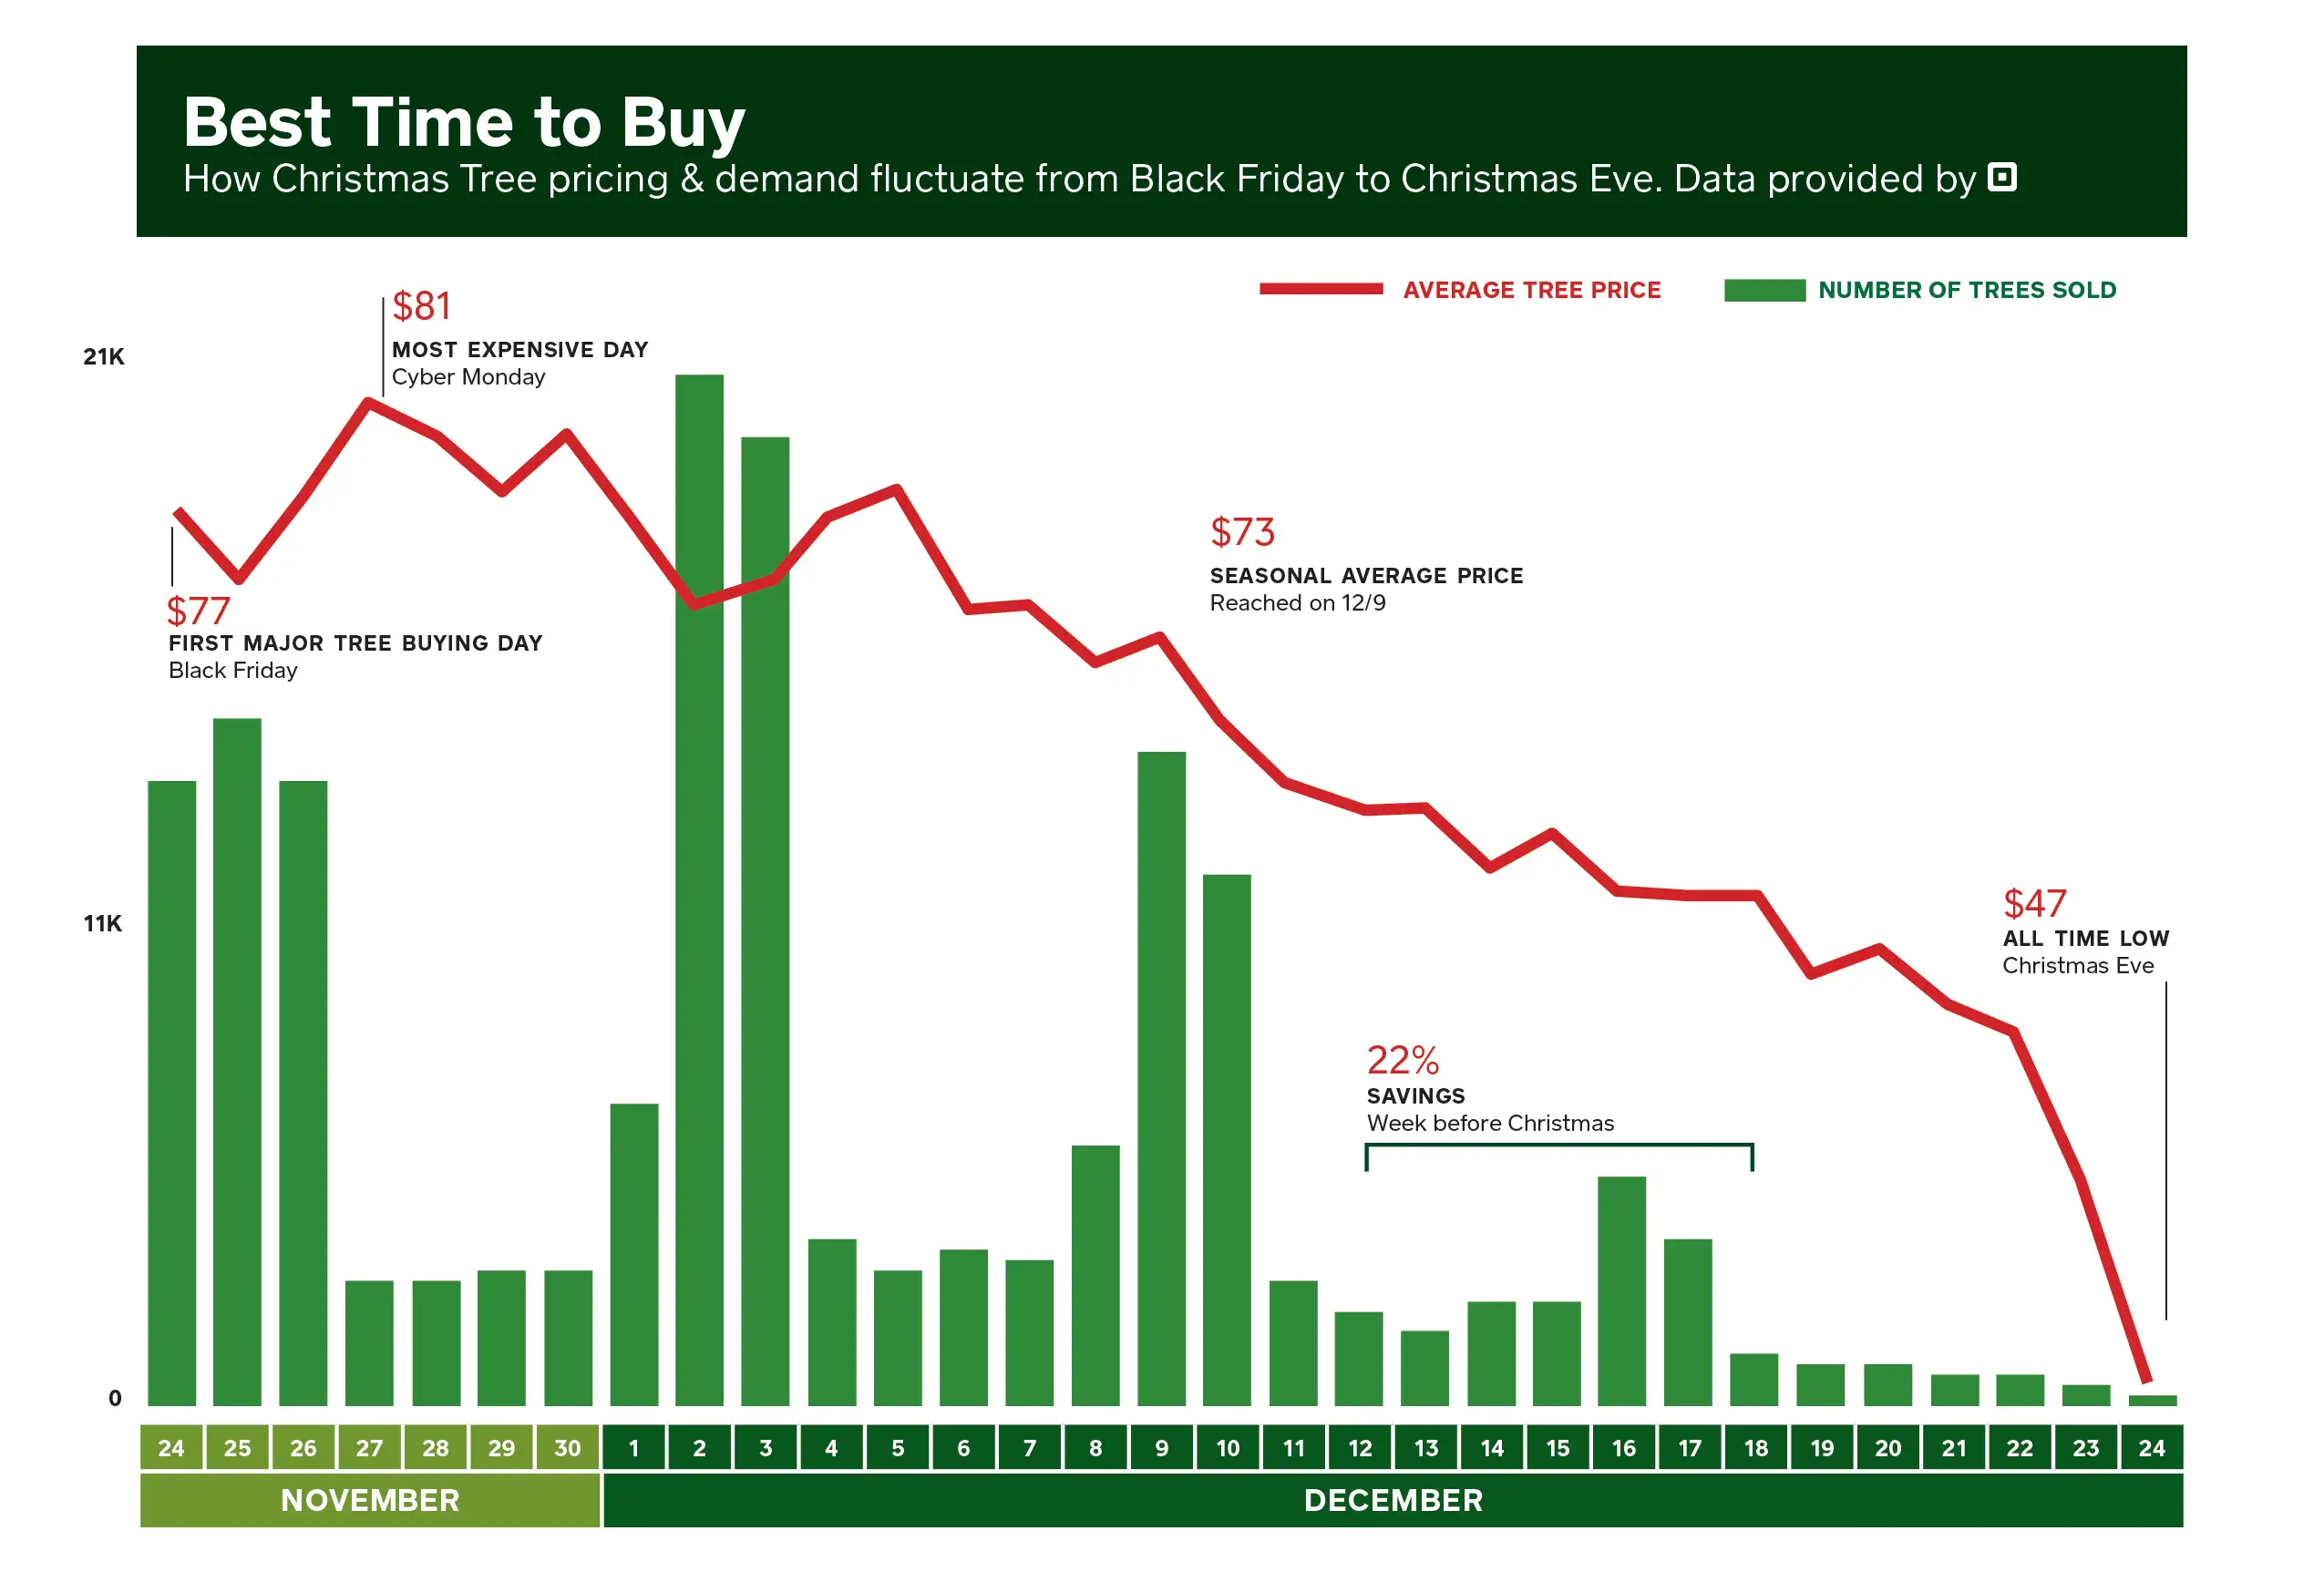 For many locals, it's time to buy Christmas trees